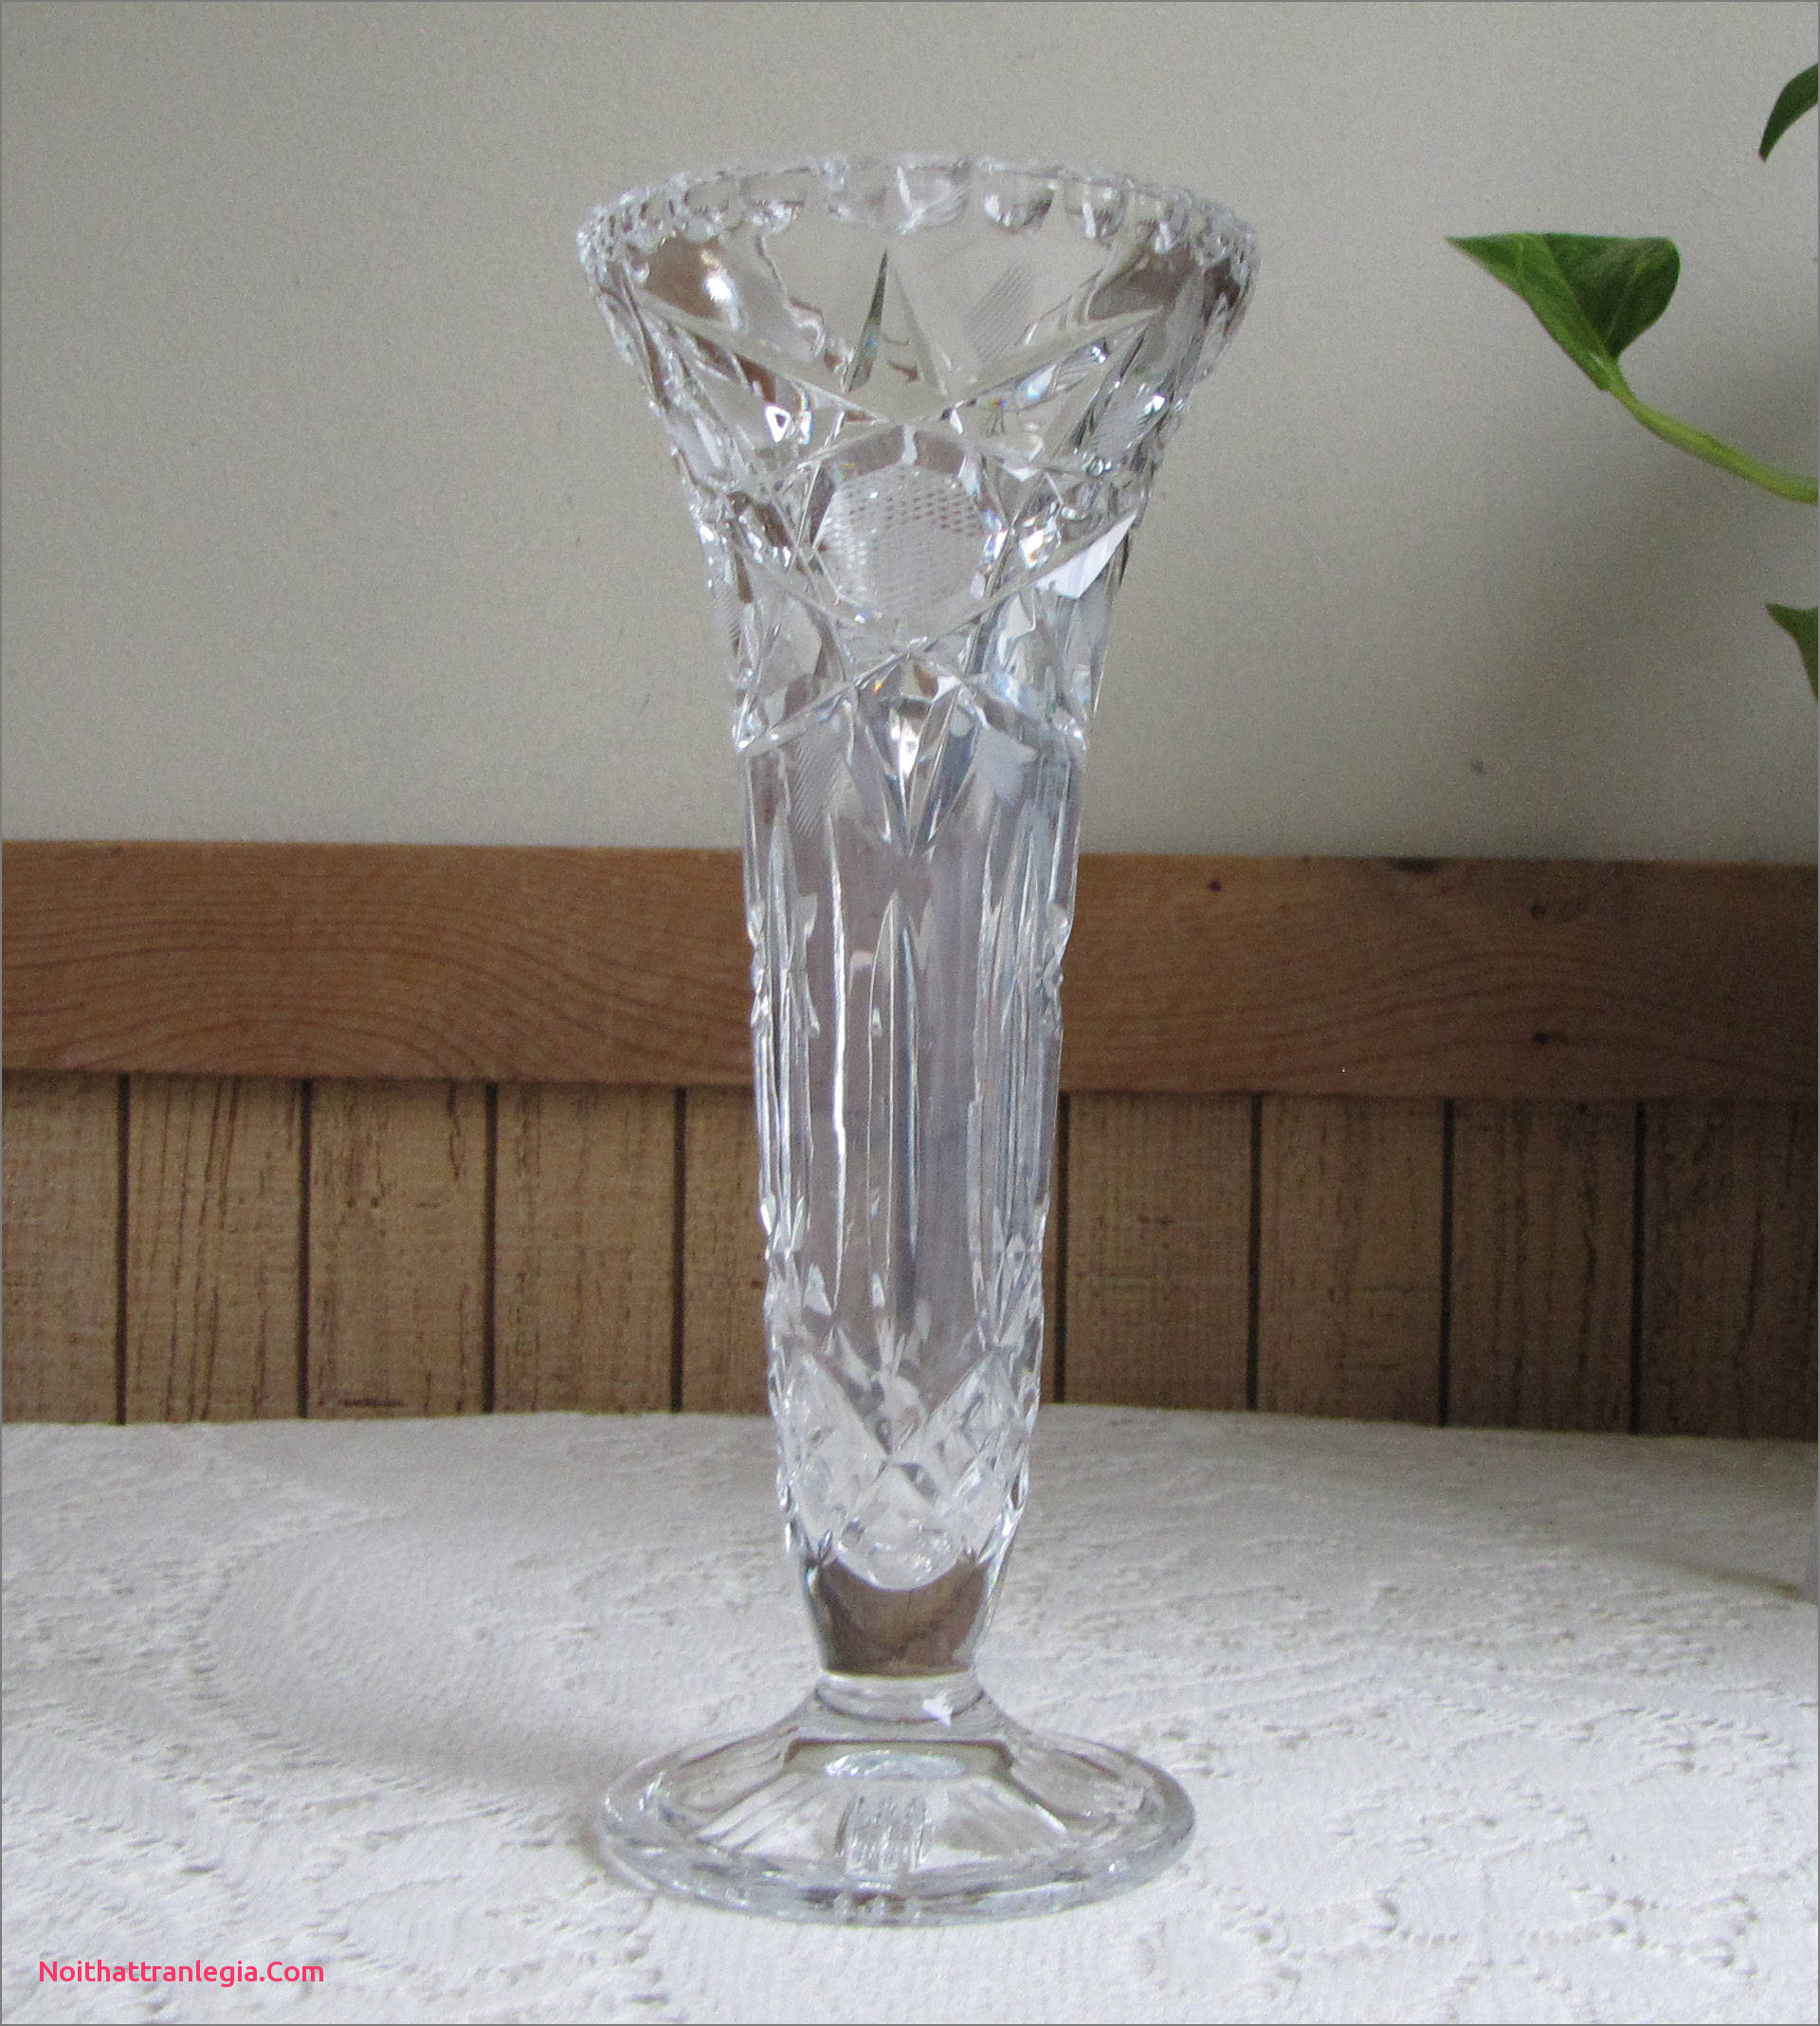 19 Awesome Set Of Small Glass Vases 2023 free download set of small glass vases of 20 cut glass antique vase noithattranlegia vases design within crystal vase cut glass flower vase etched waffle and stars footed vintage vases and florist ware